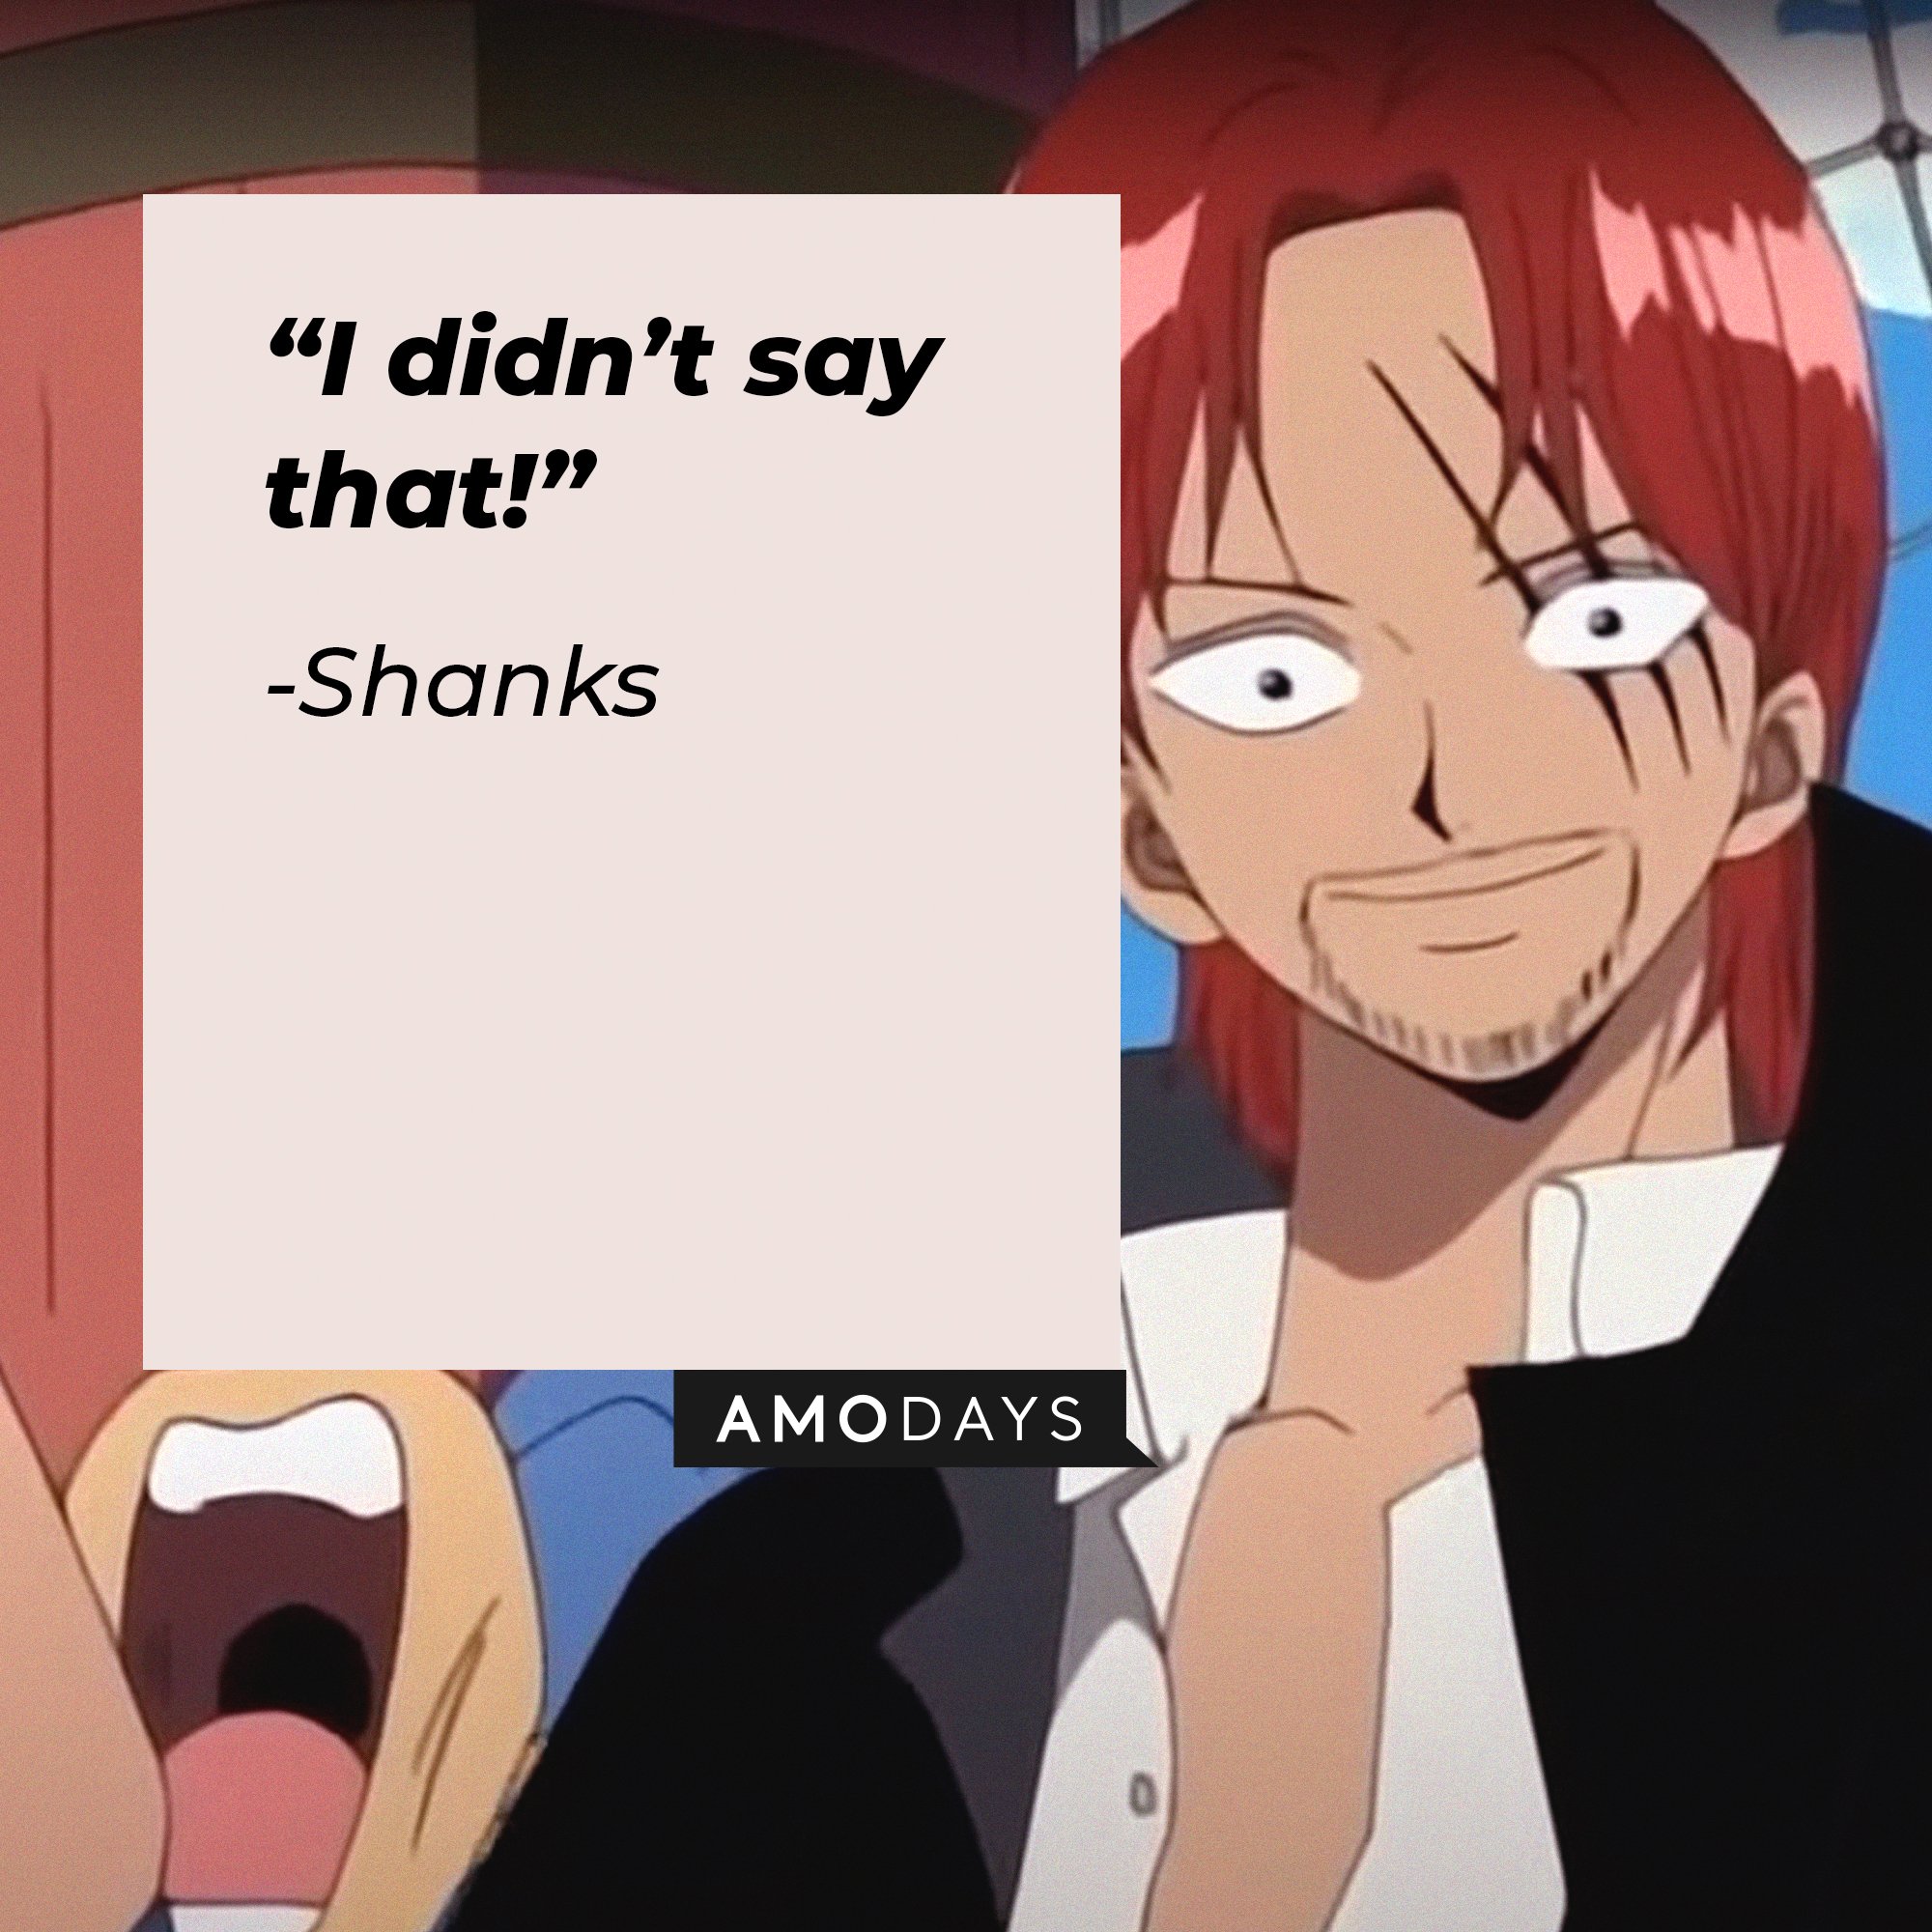 Shanks’ quote: "I didn't say that!" | Image: AmoDays